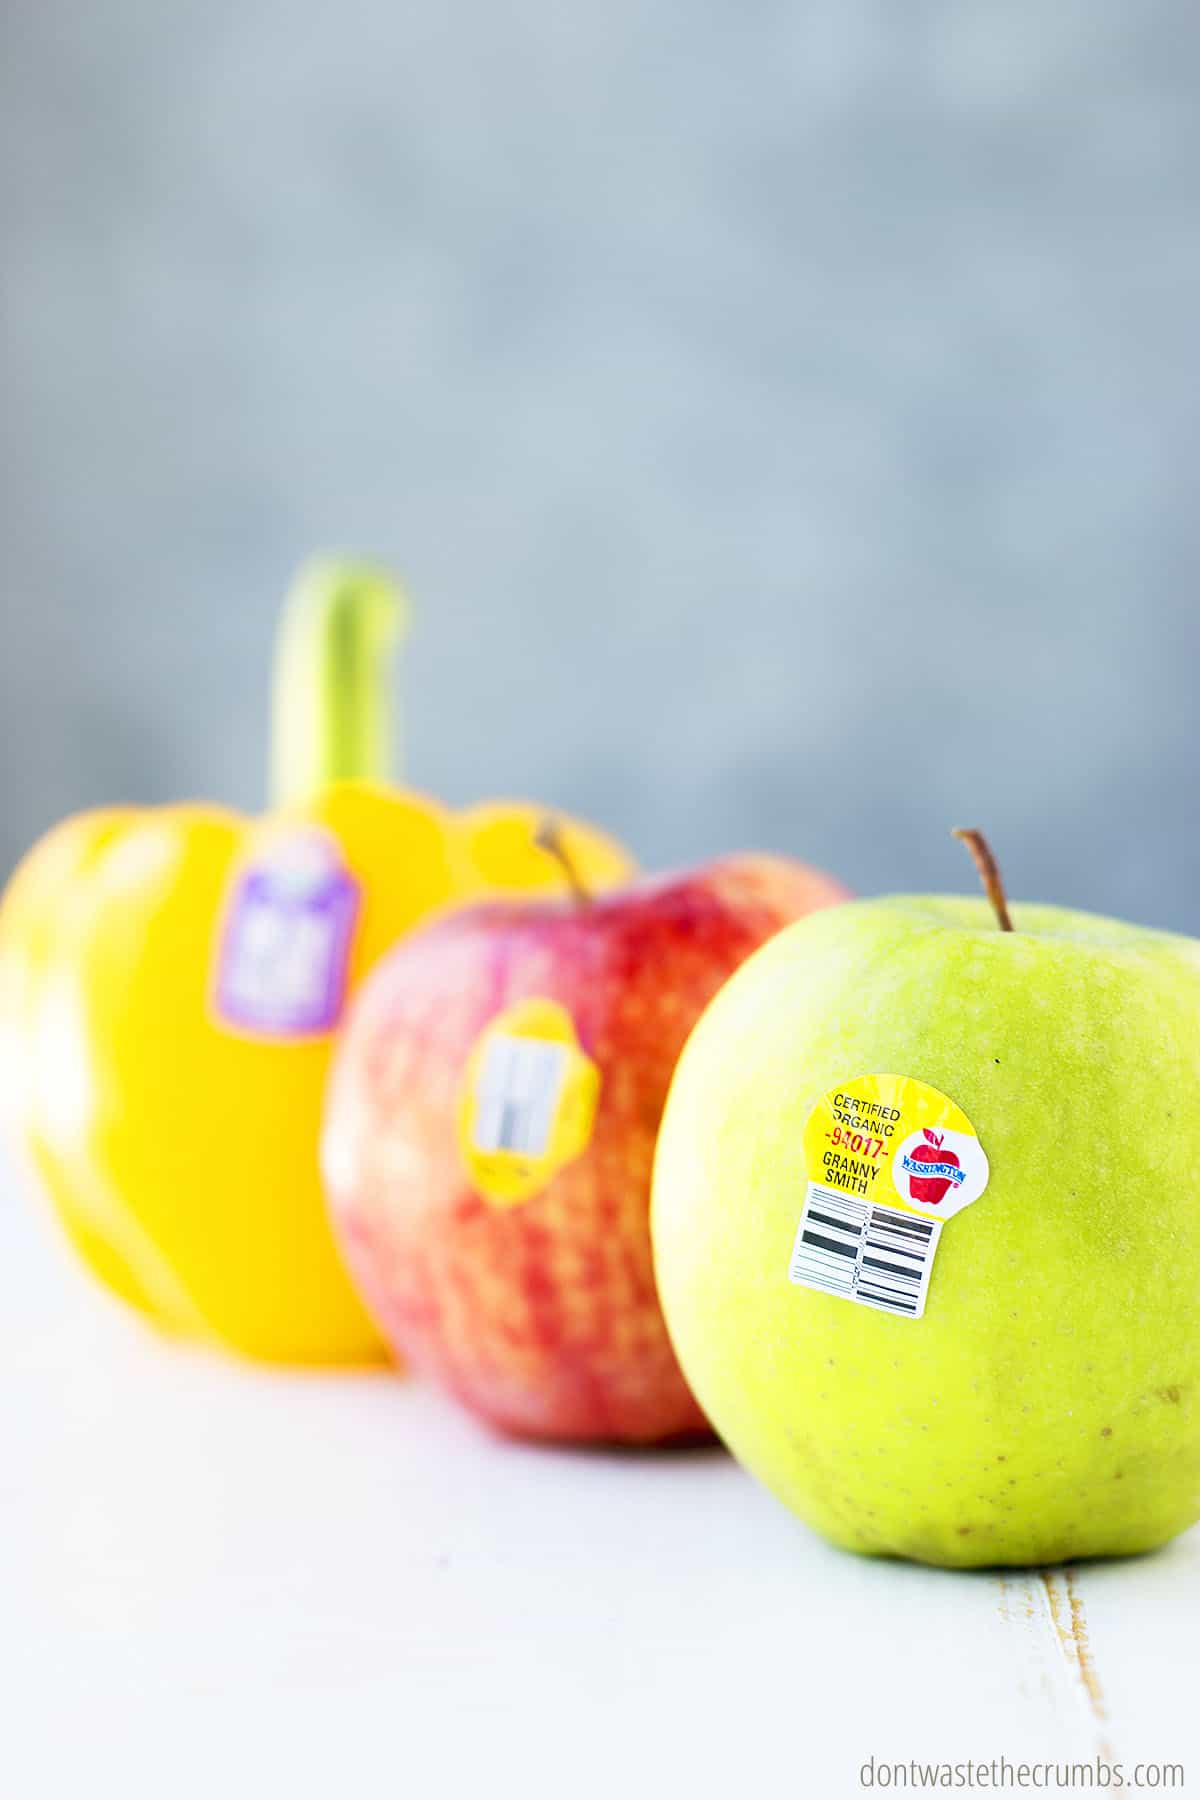 Granny smith apple, red apple, and yellow bell pepper and on a table with PLU stickers.